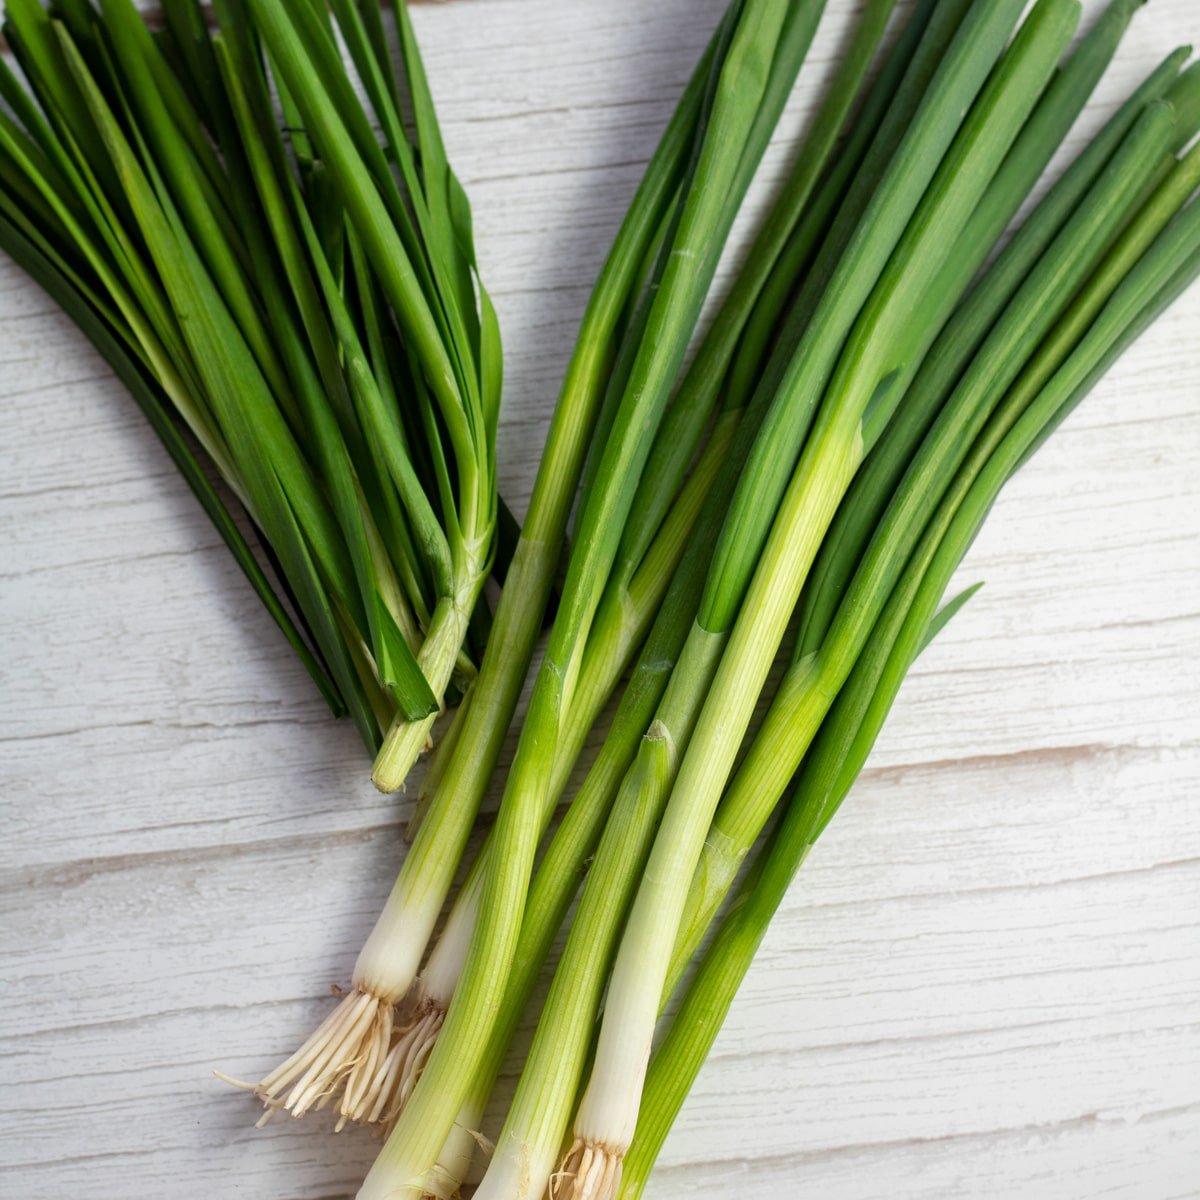 The Difference Between Chives and Green Onions 3